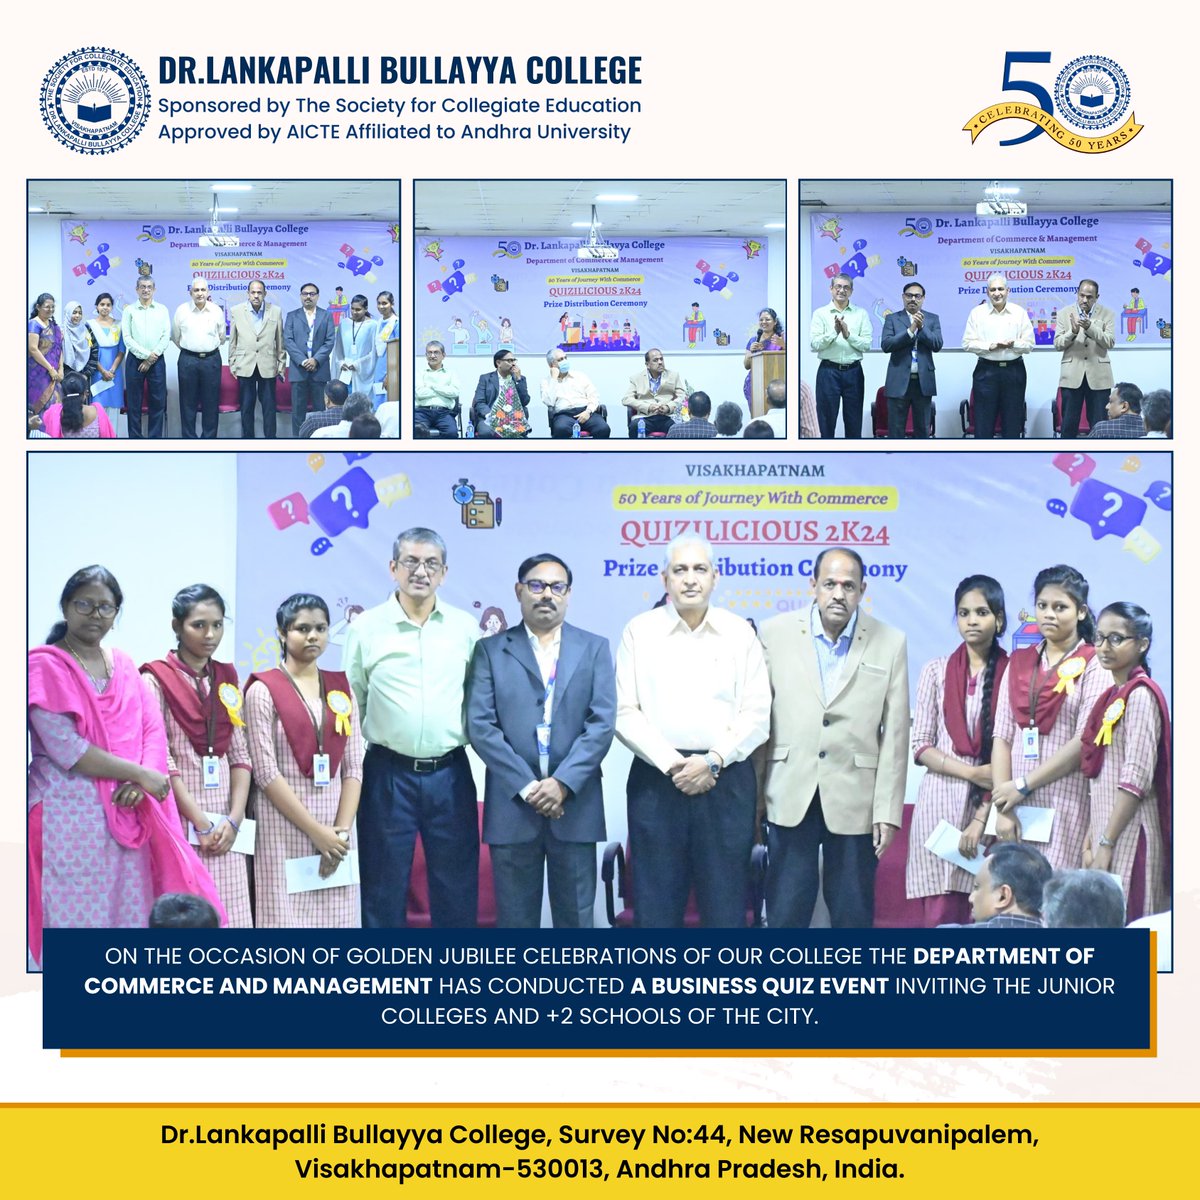 *Quizilicious 2k24:*
On the occasion of the Golden Jubilee celebrations of our college, the Department of Commerce and Management conducted a Business Quiz Event inviting Junior Colleges and +2 schools in the city.

#DrLBCollege #Quiz #Commerce #GoldenJubilee
#Quizilicious